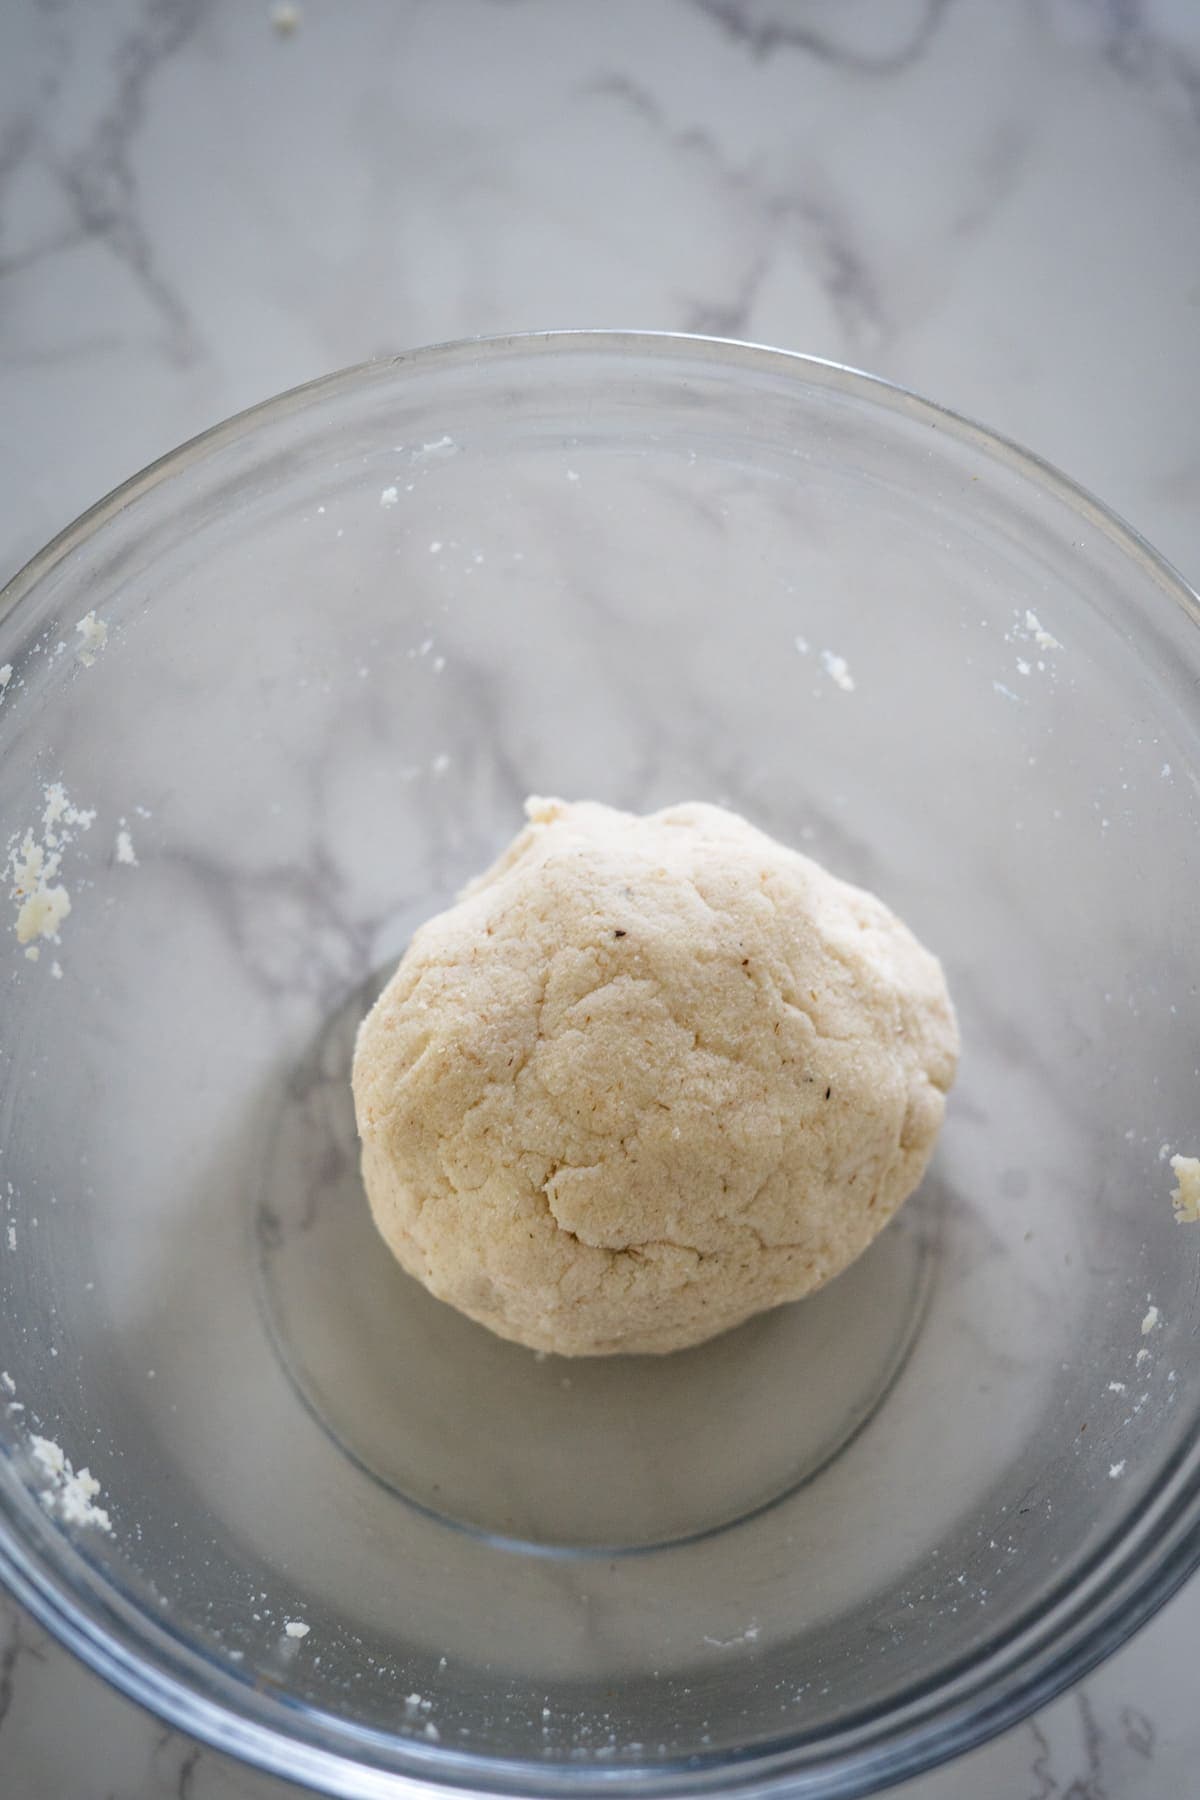 A ball of coconut flour dough in a glass bowl.